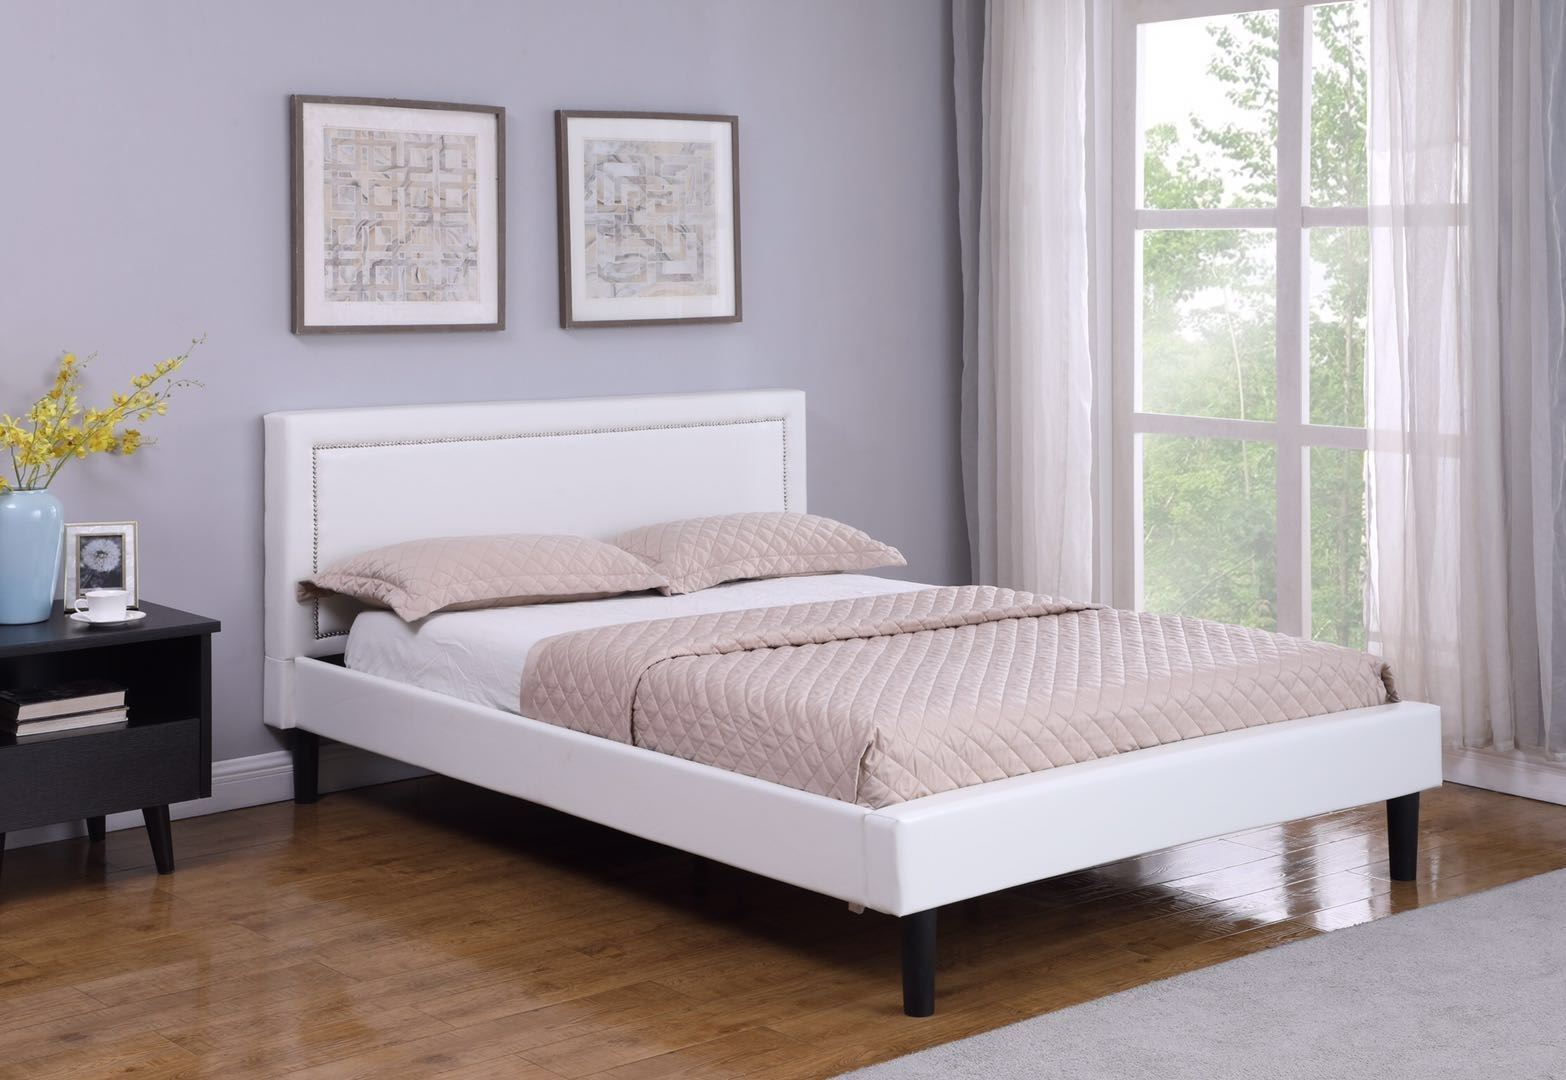 JOYANCE PLATFORM BED FRAME IN DOUBLE/ QUEEN SIZE IN WHITE PU